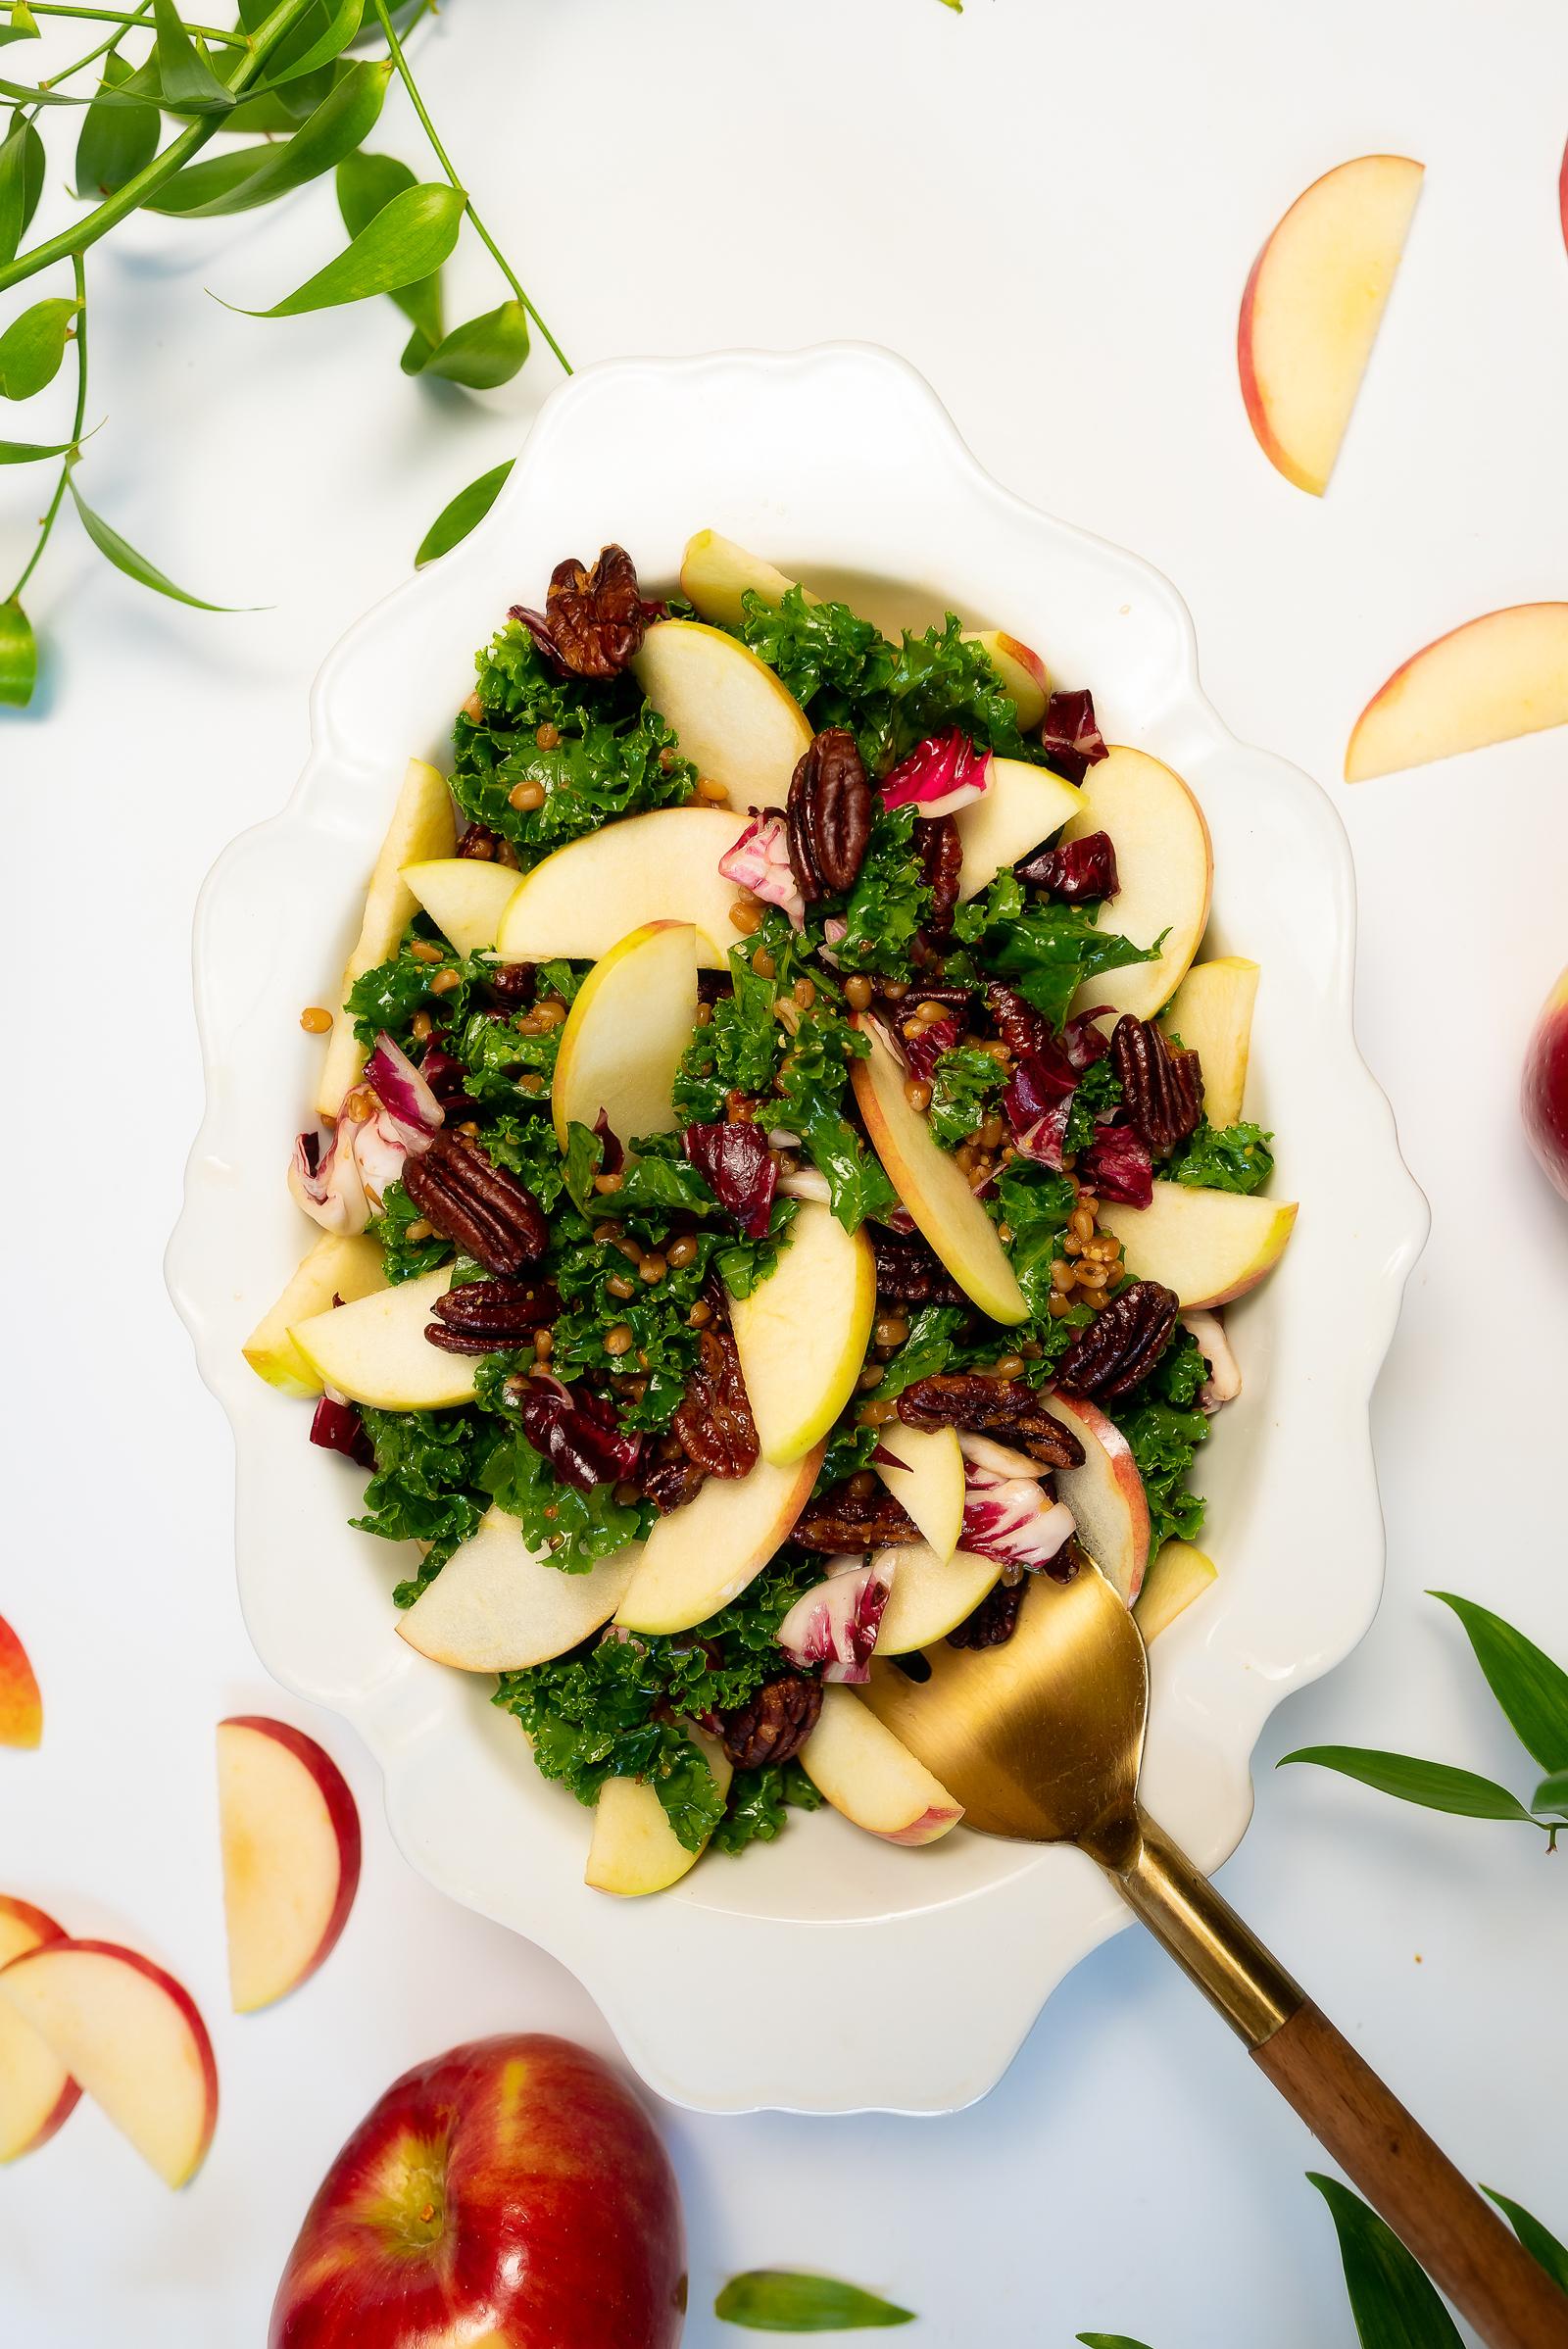 Stemilt Rave Apple Salad with Kale, Roasted Pecans, Wheatberries, Cabbage and an Apple Cider Mustard Vinaigrette Recope